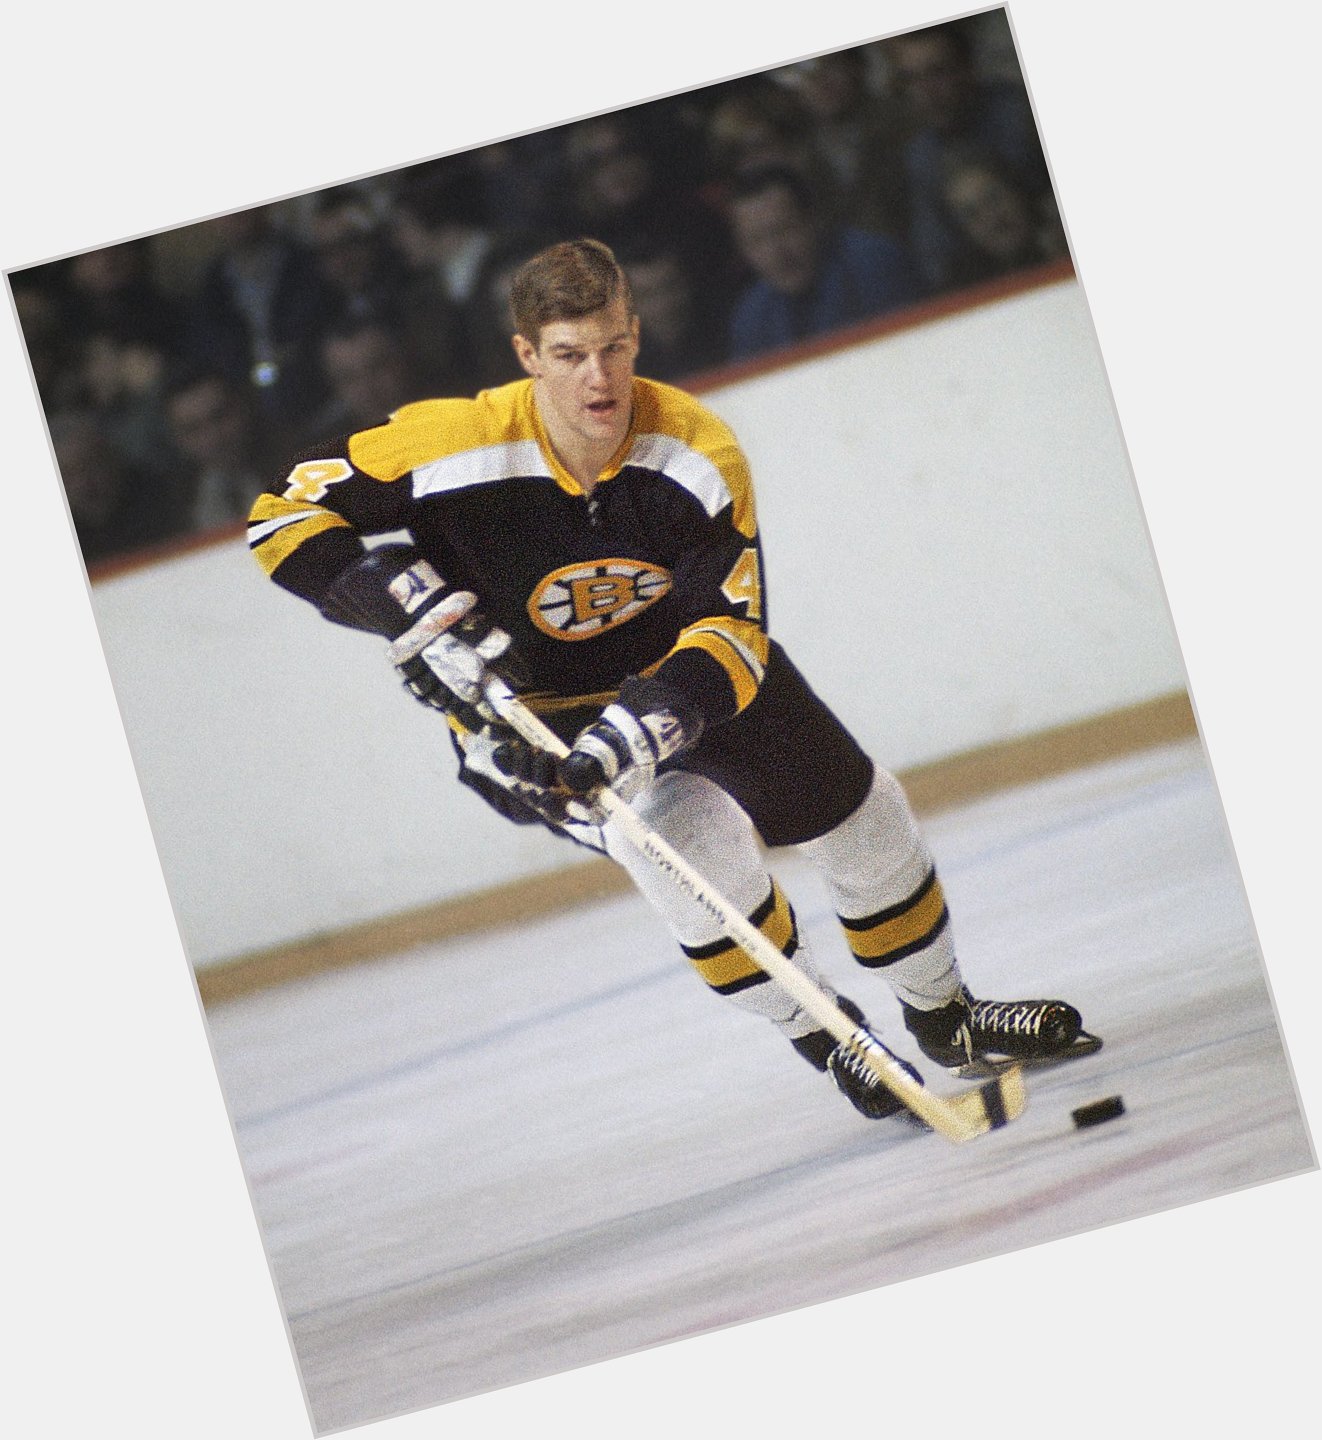  There goes the best that ever was . Happy 75th birthday to the great Bobby Orr! 